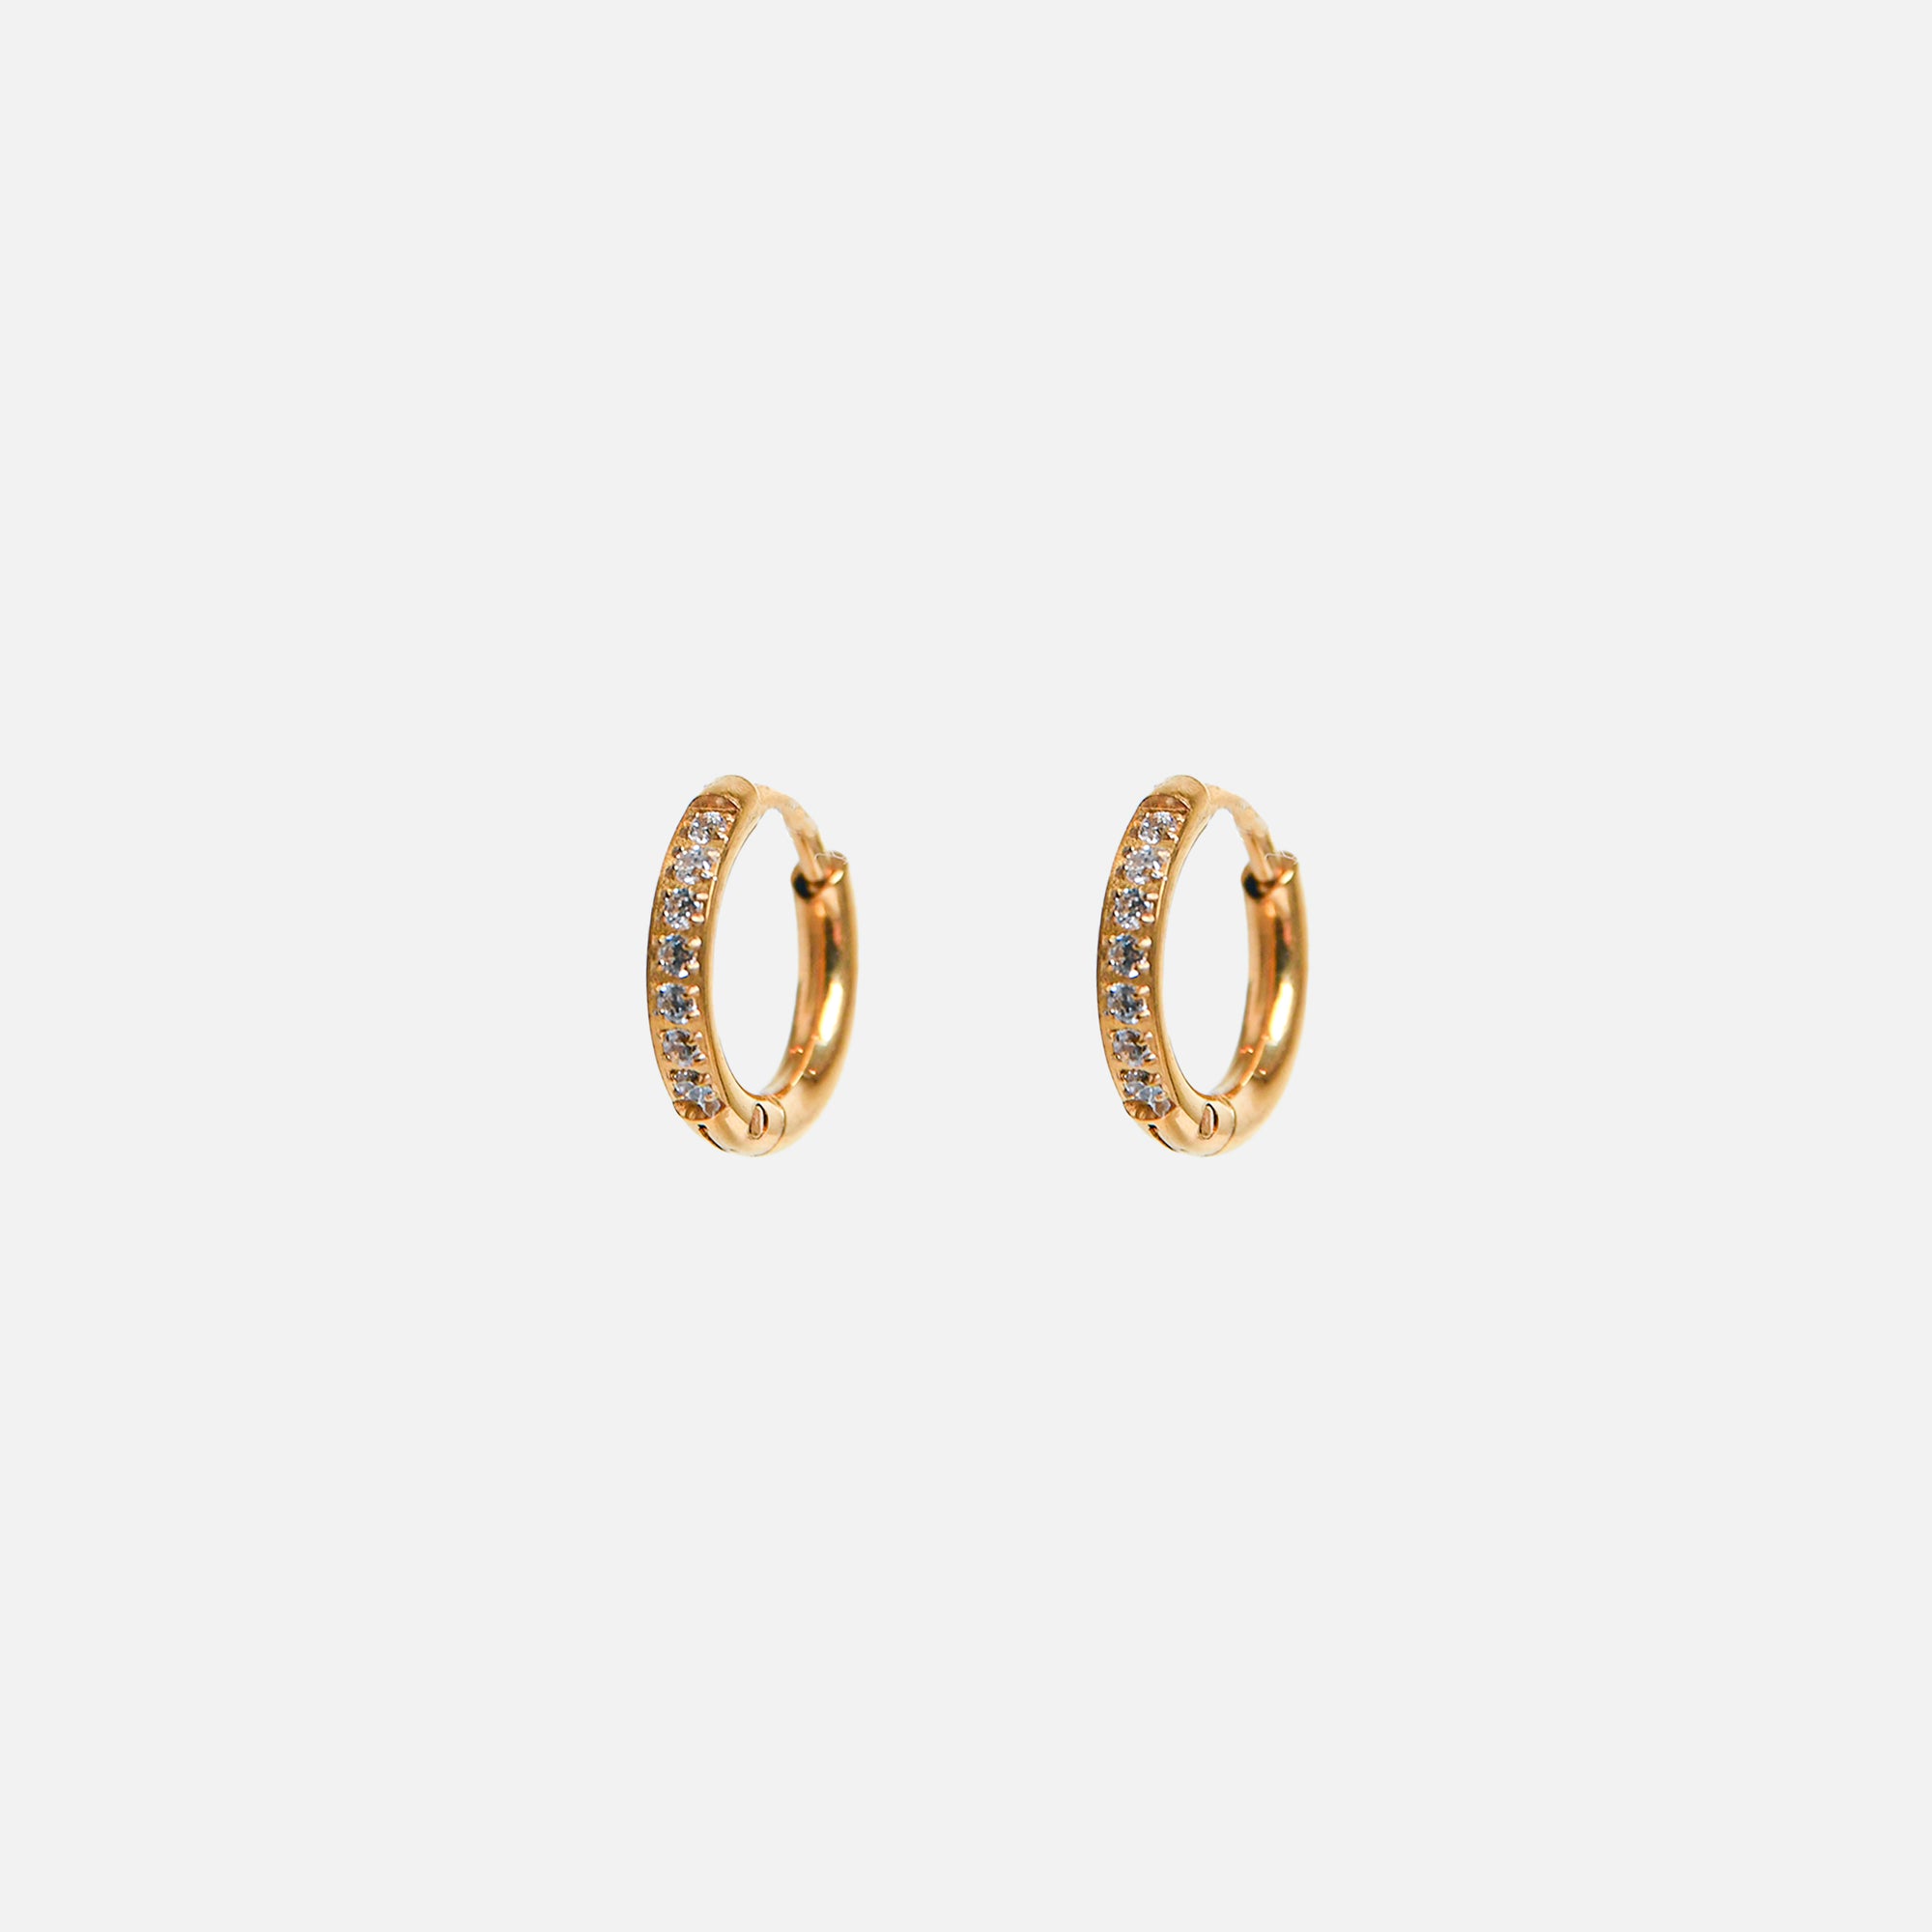 Stainless steel golden hoop earrings with small stones